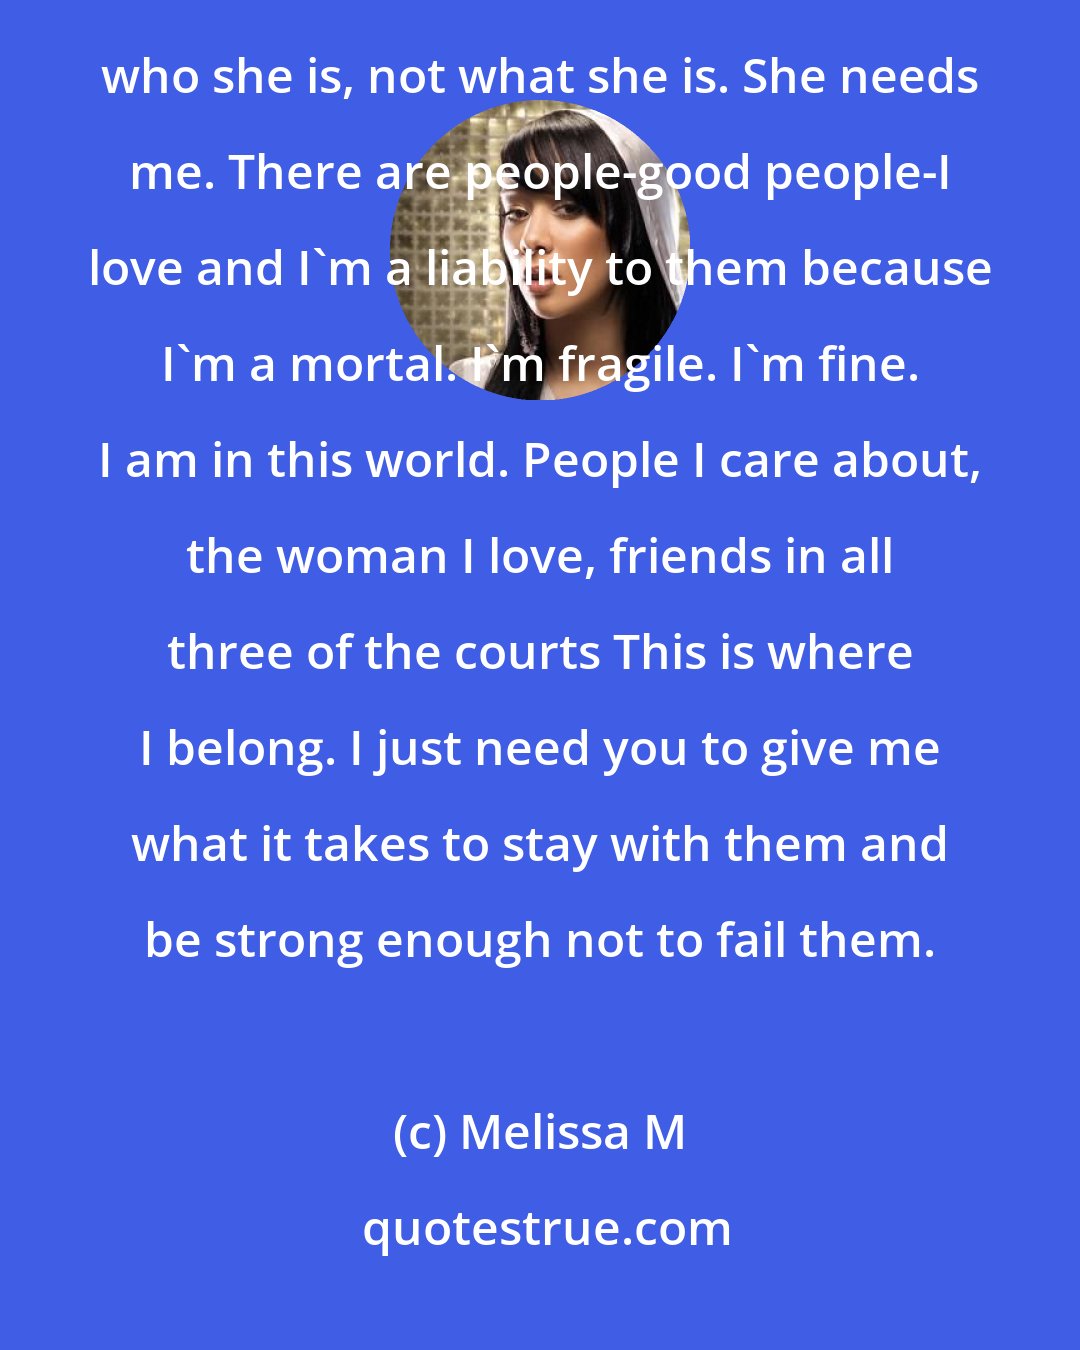 Melissa M: I ask to become a faery because I love a faery queen, and because she deserves to have someone who loves her for who she is, not what she is. She needs me. There are people-good people-I love and I'm a liability to them because I'm a mortal. I'm fragile. I'm fine. I am in this world. People I care about, the woman I love, friends in all three of the courts This is where I belong. I just need you to give me what it takes to stay with them and be strong enough not to fail them.